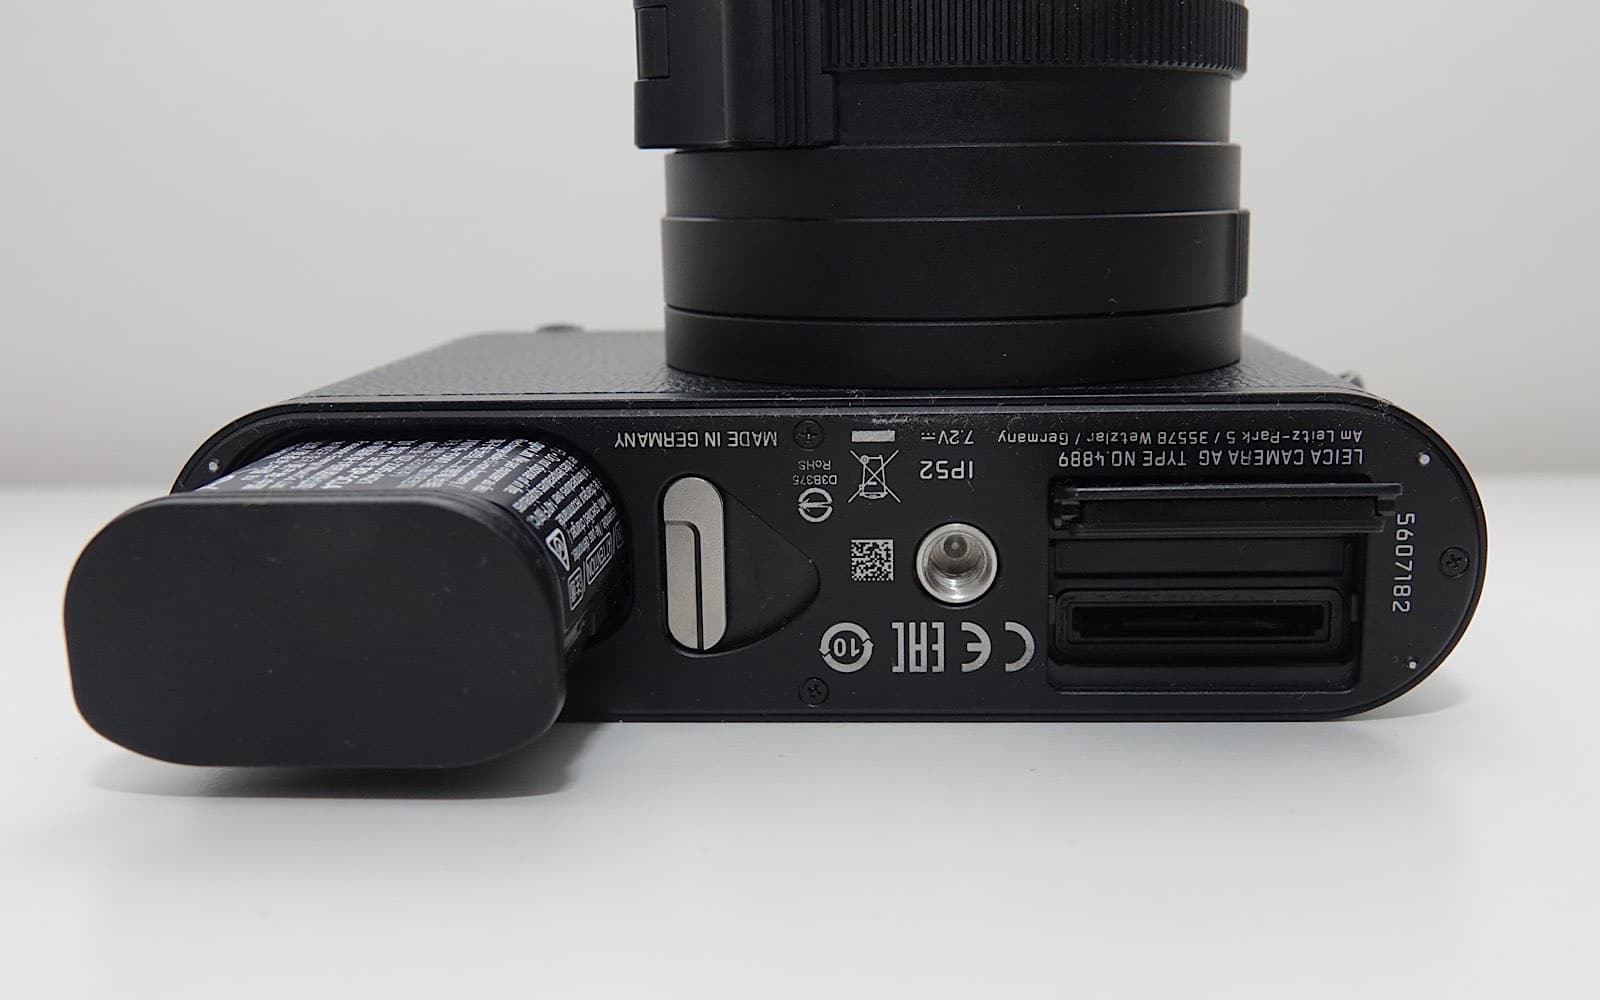 The battery and SD card latch at the bottom of the Leica Q2 Monochrom.